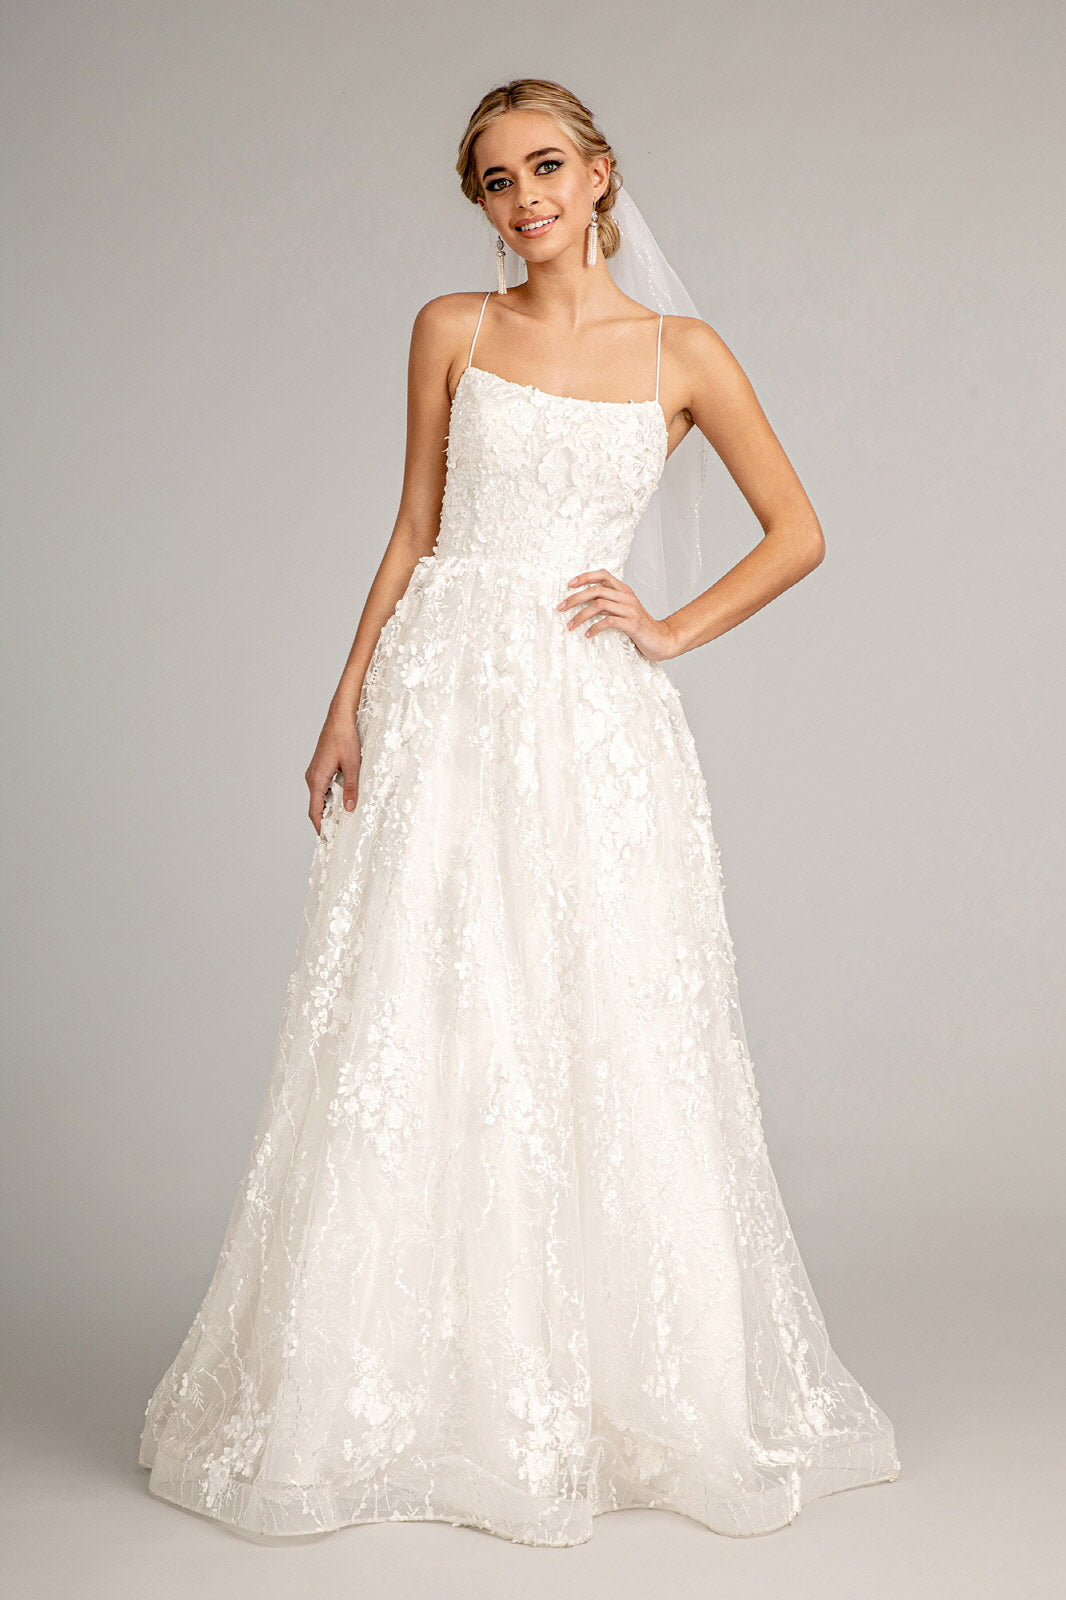 Floral Embroidered Lace-Up Mesh Wedding Gown Sweetheart Neckline GLGL1985 Elsy Style WEDDING GOWNS